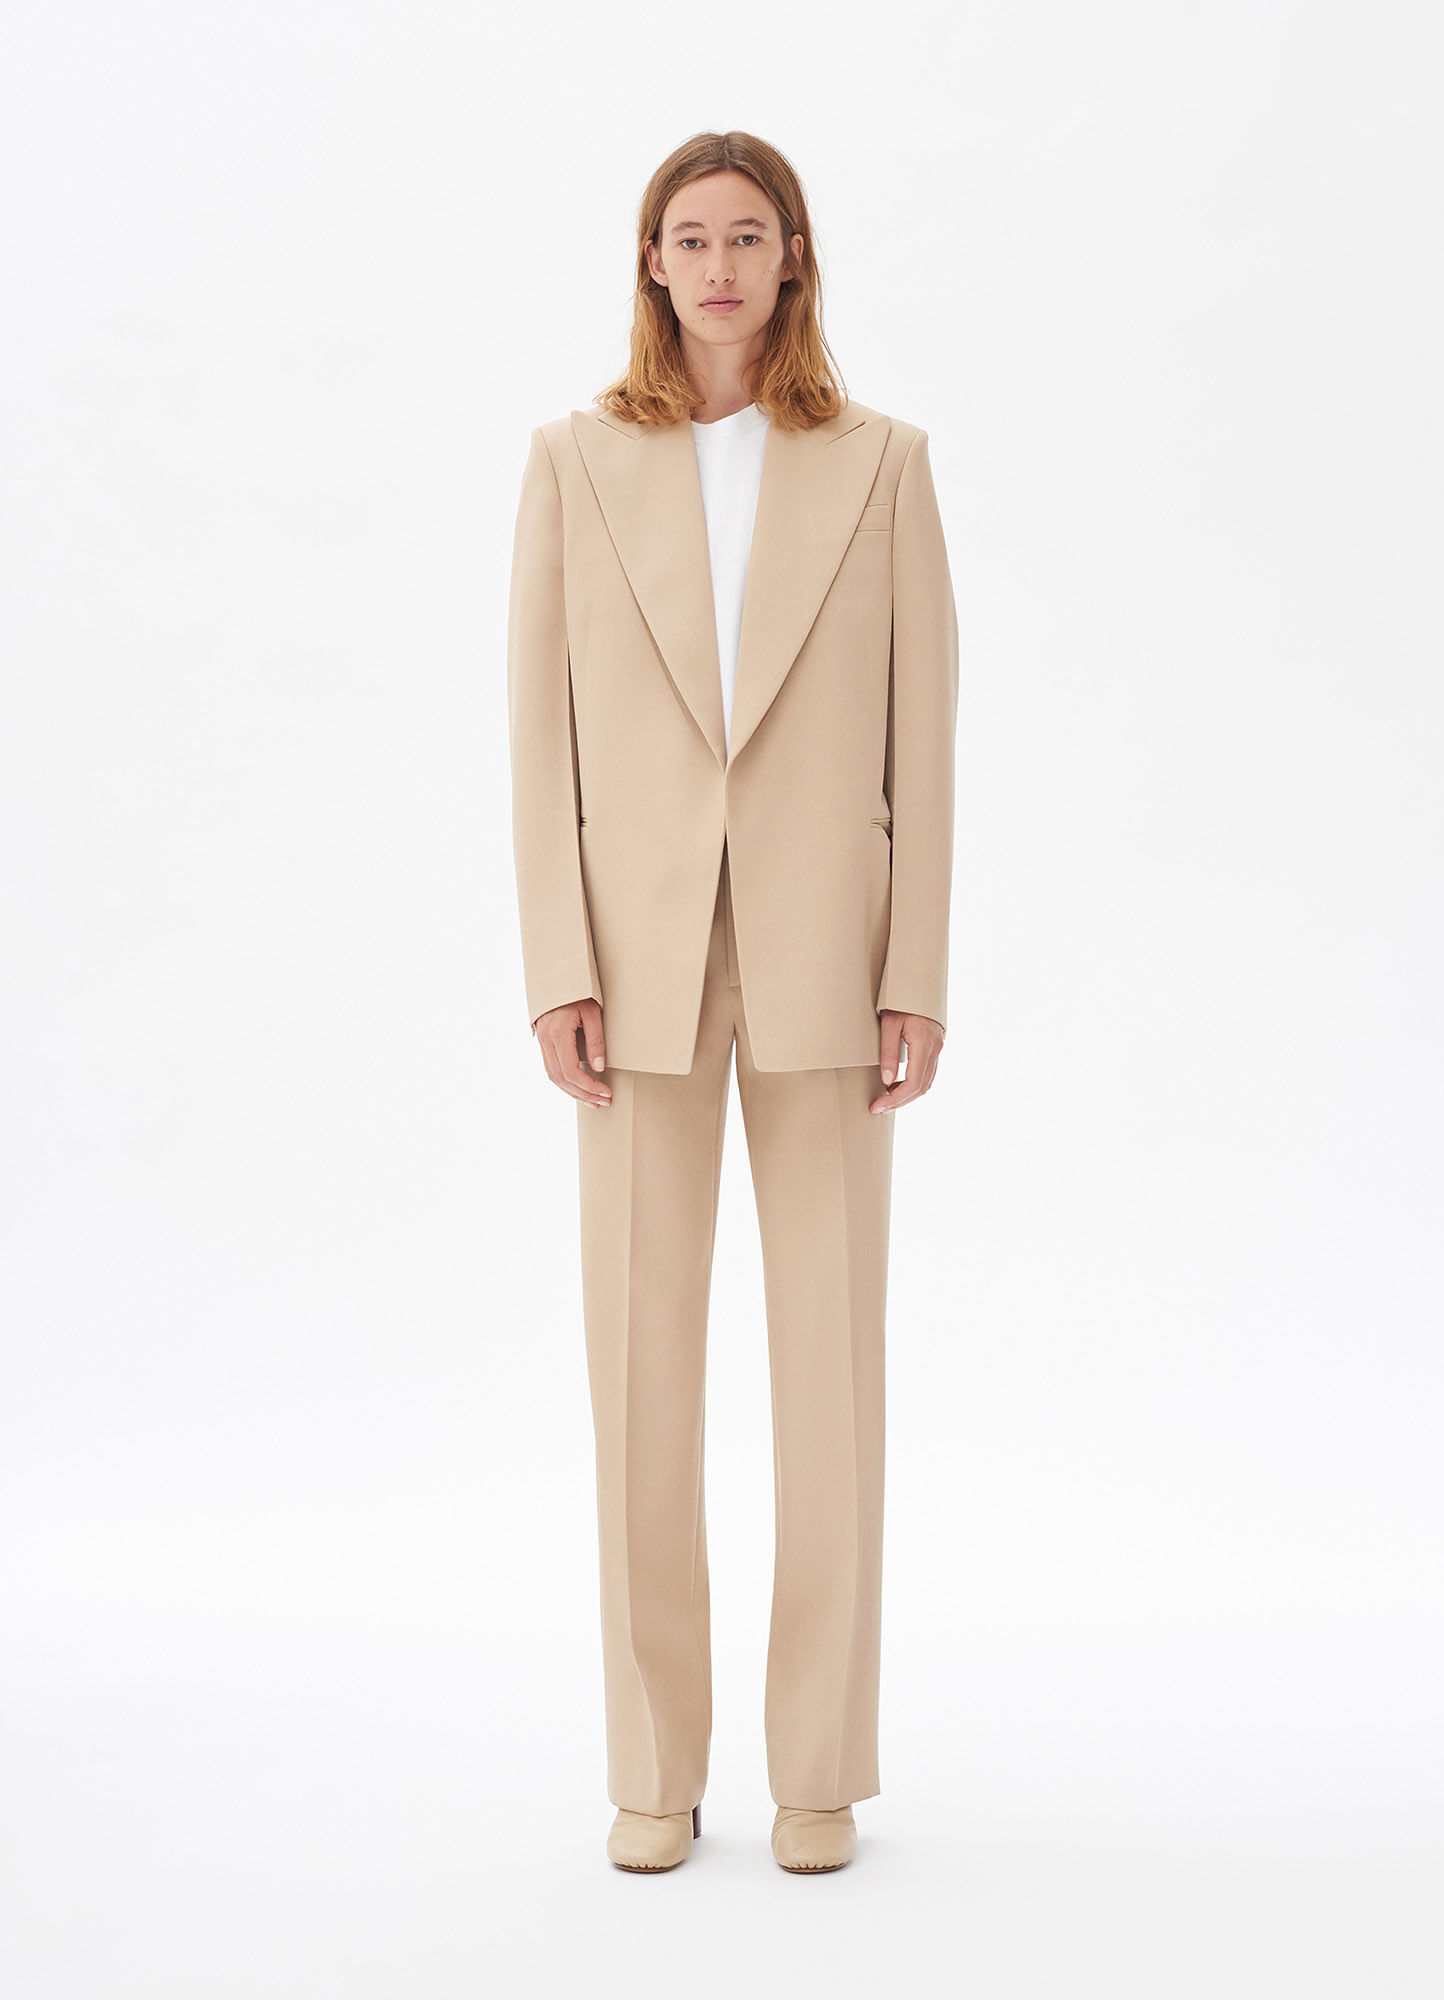 The New Power Suit: How Designers are Redefining Spring Workwear